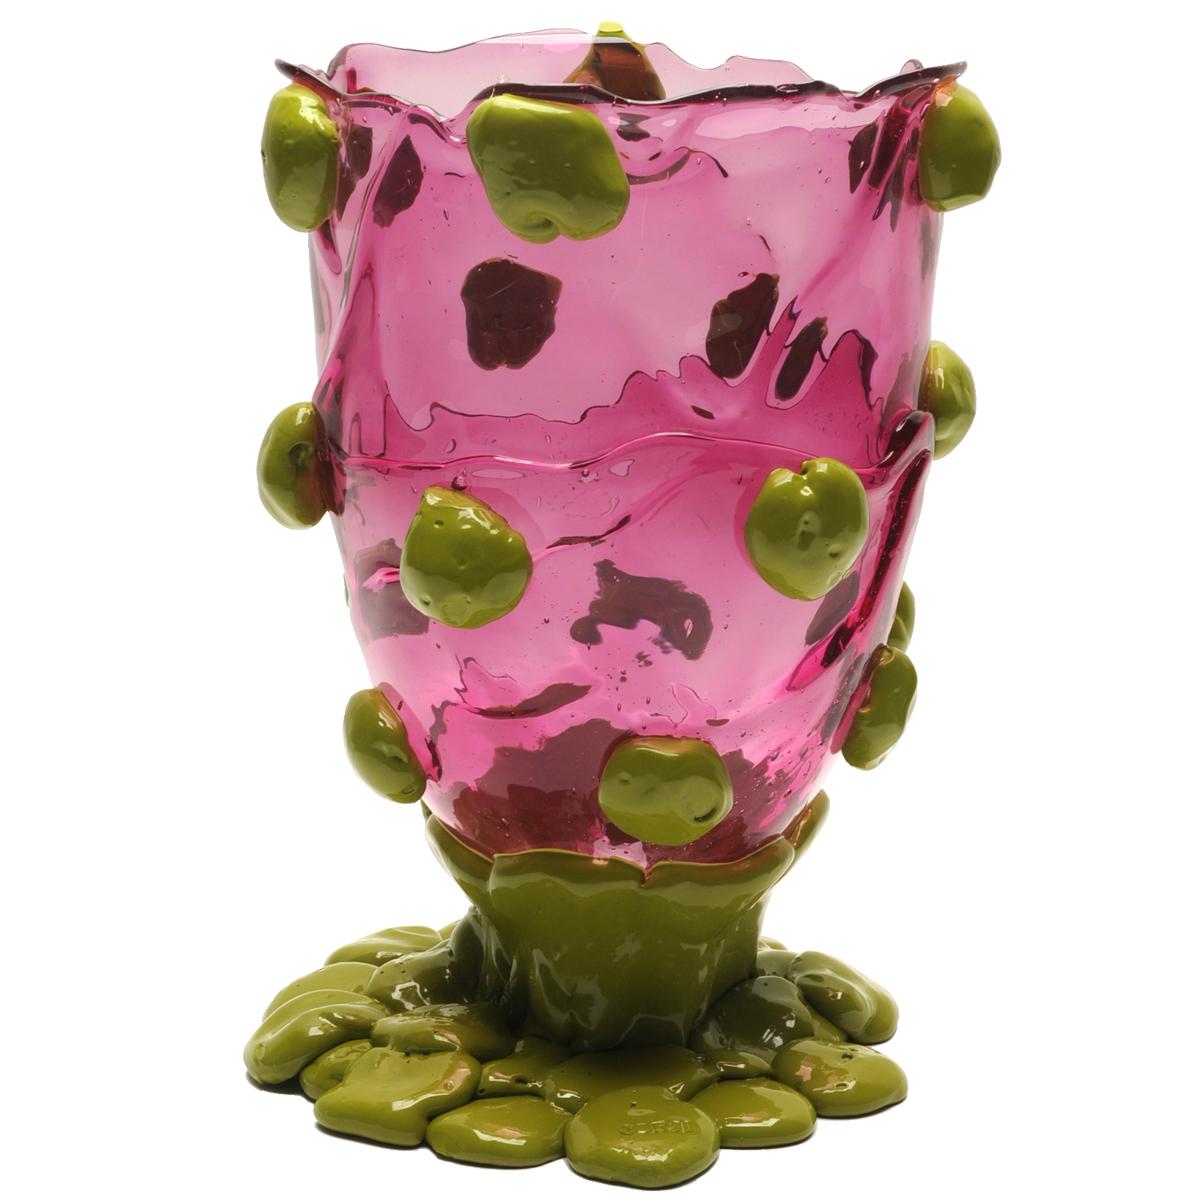 Nugget vase, clear light fuchsia, matt dust green.
Vase in soft resin designed by Gaetano Pesce in 1995 for Fish Design collection.

Measures: L - ø 22cm x H 36cm
Colours: clear light fuchsia, matt dust green.
Other sizes available.
Vase in